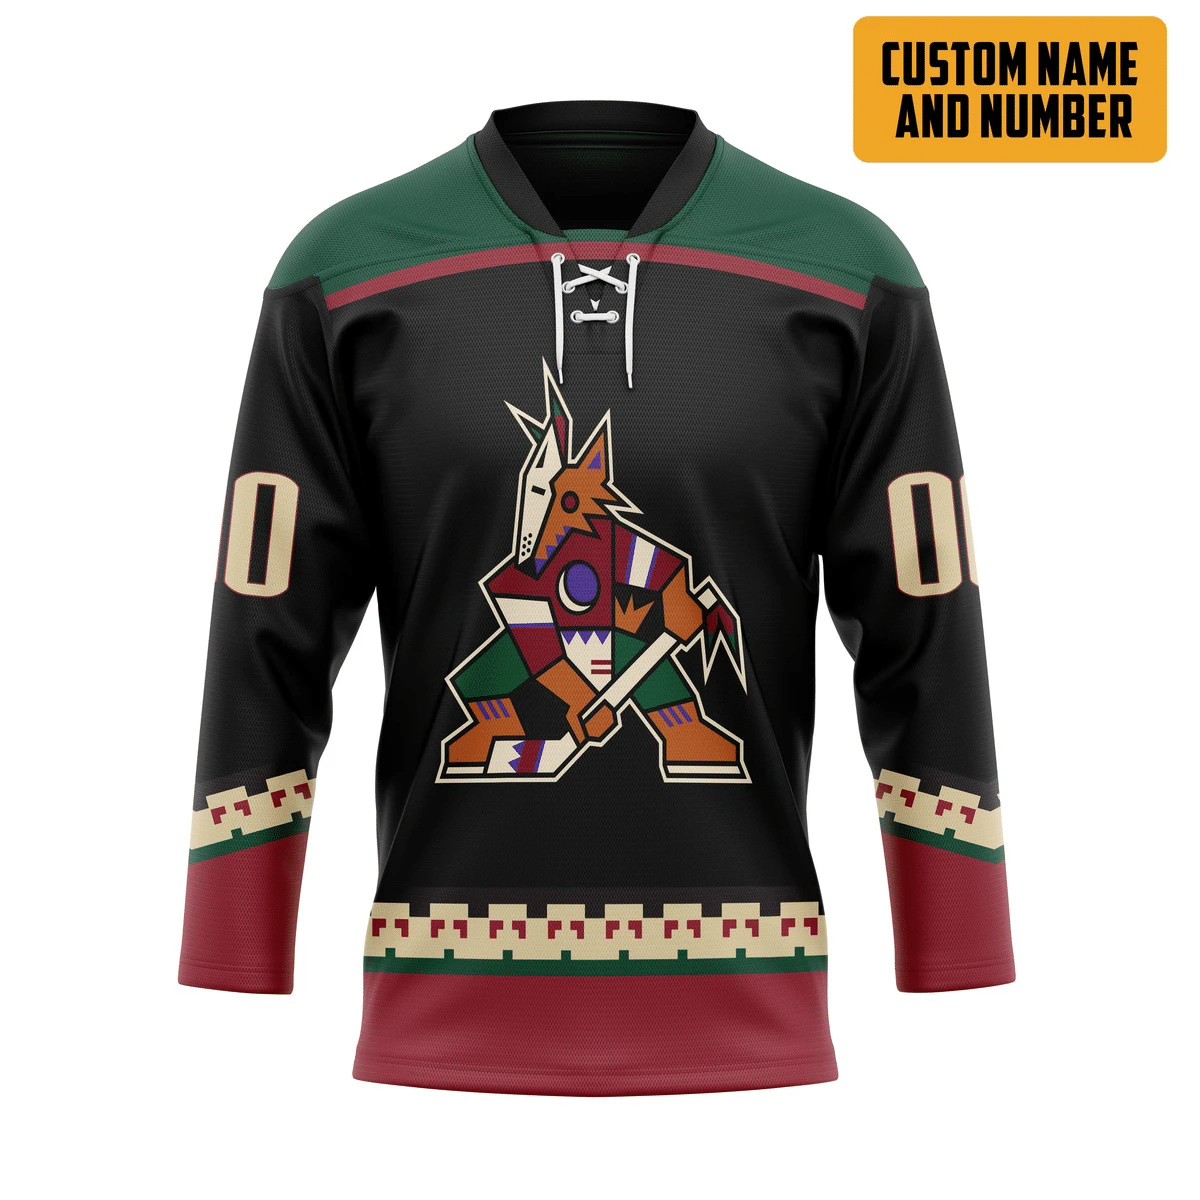 The style of a hockey jersey should match your personality. 73